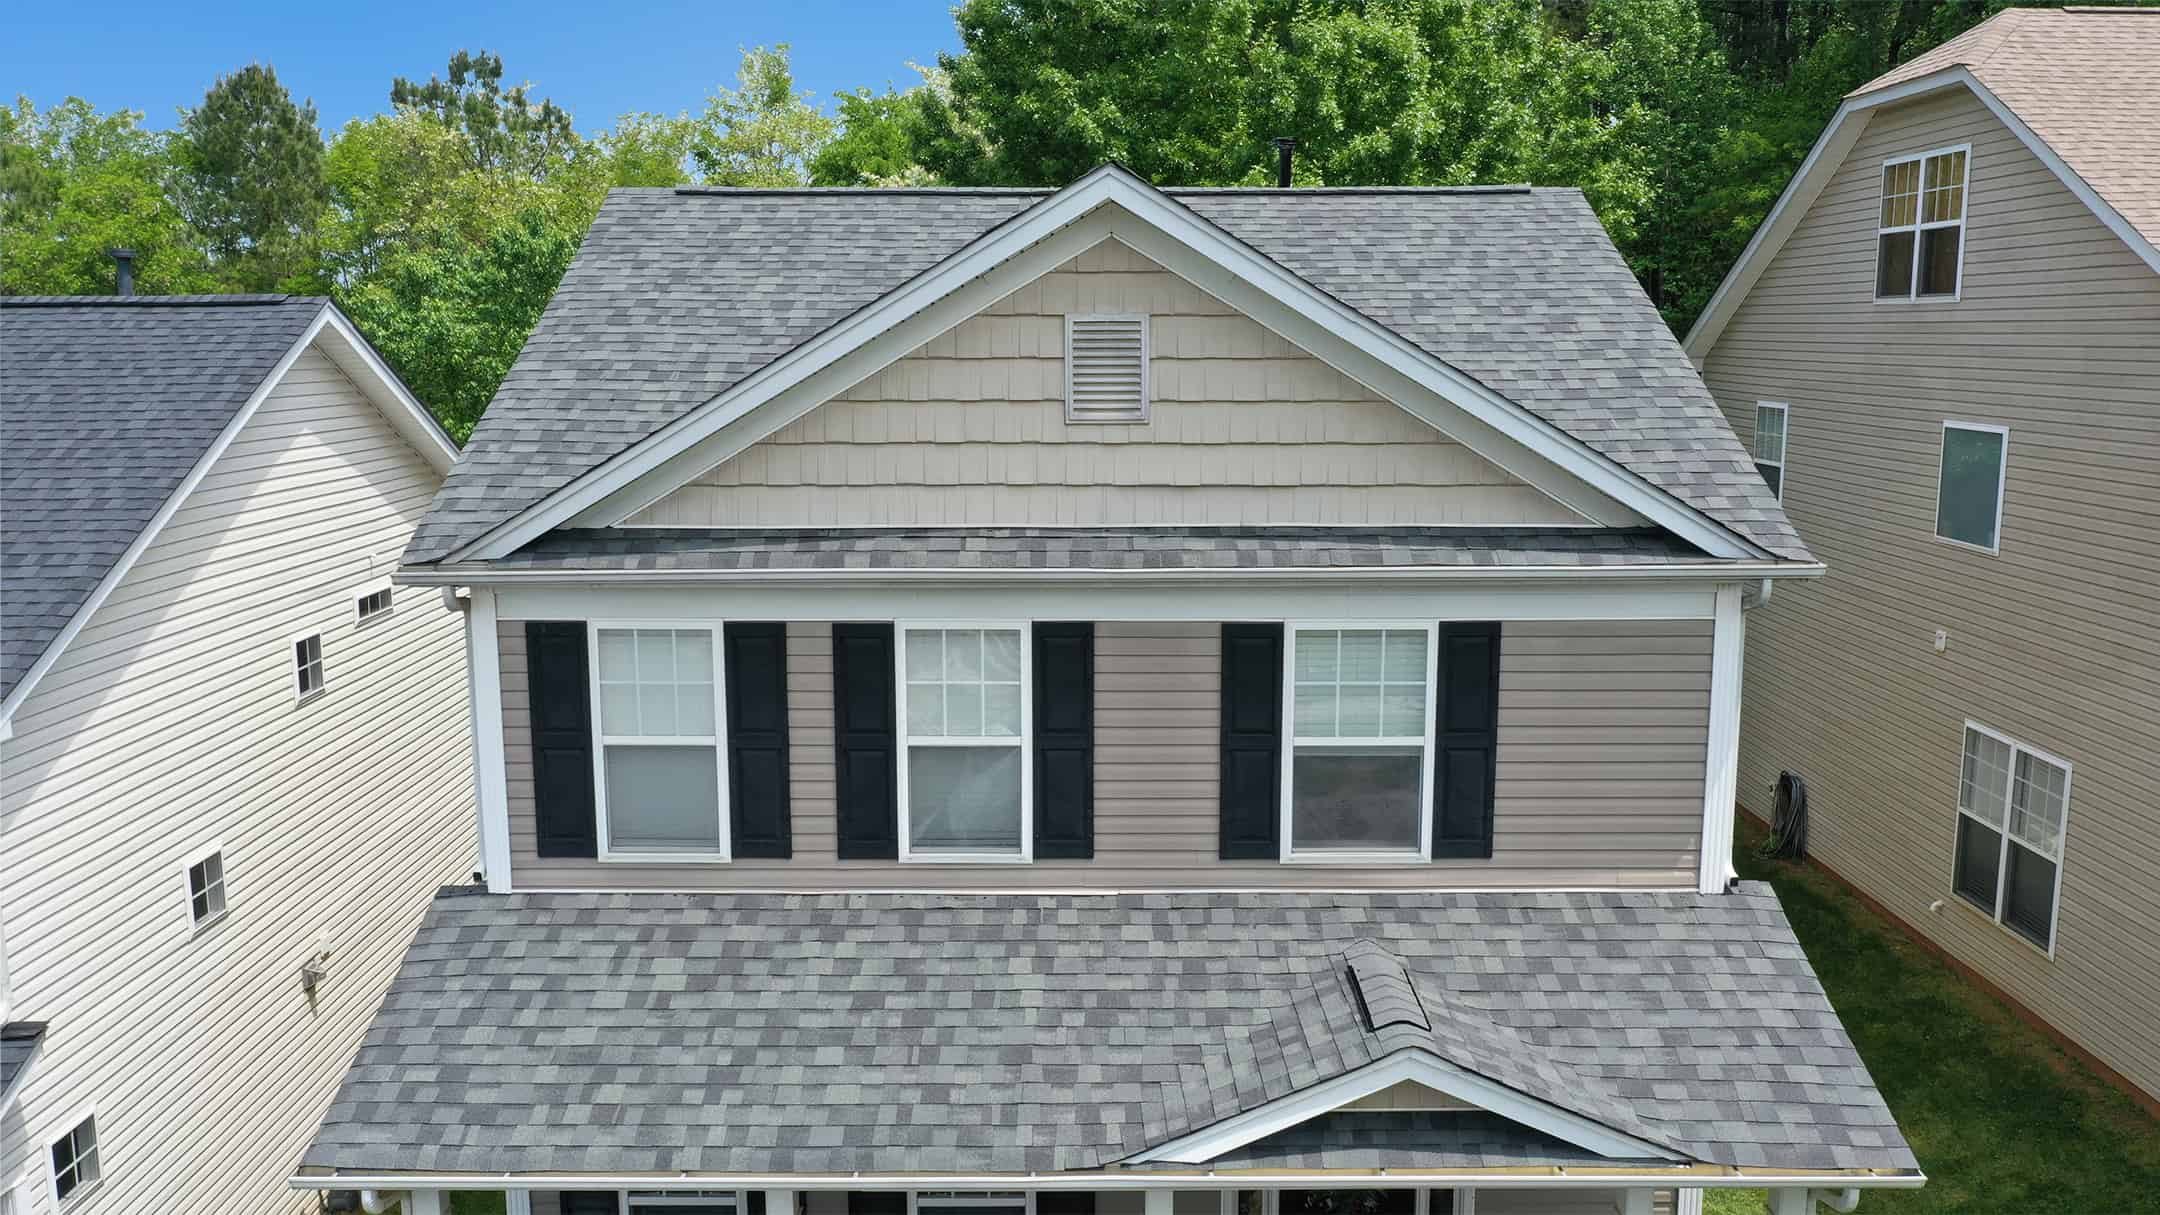 http://front%20top%20view%20of%20residential%20home%20with%20oakridge%20trudef%20estate%20gray%20shingles